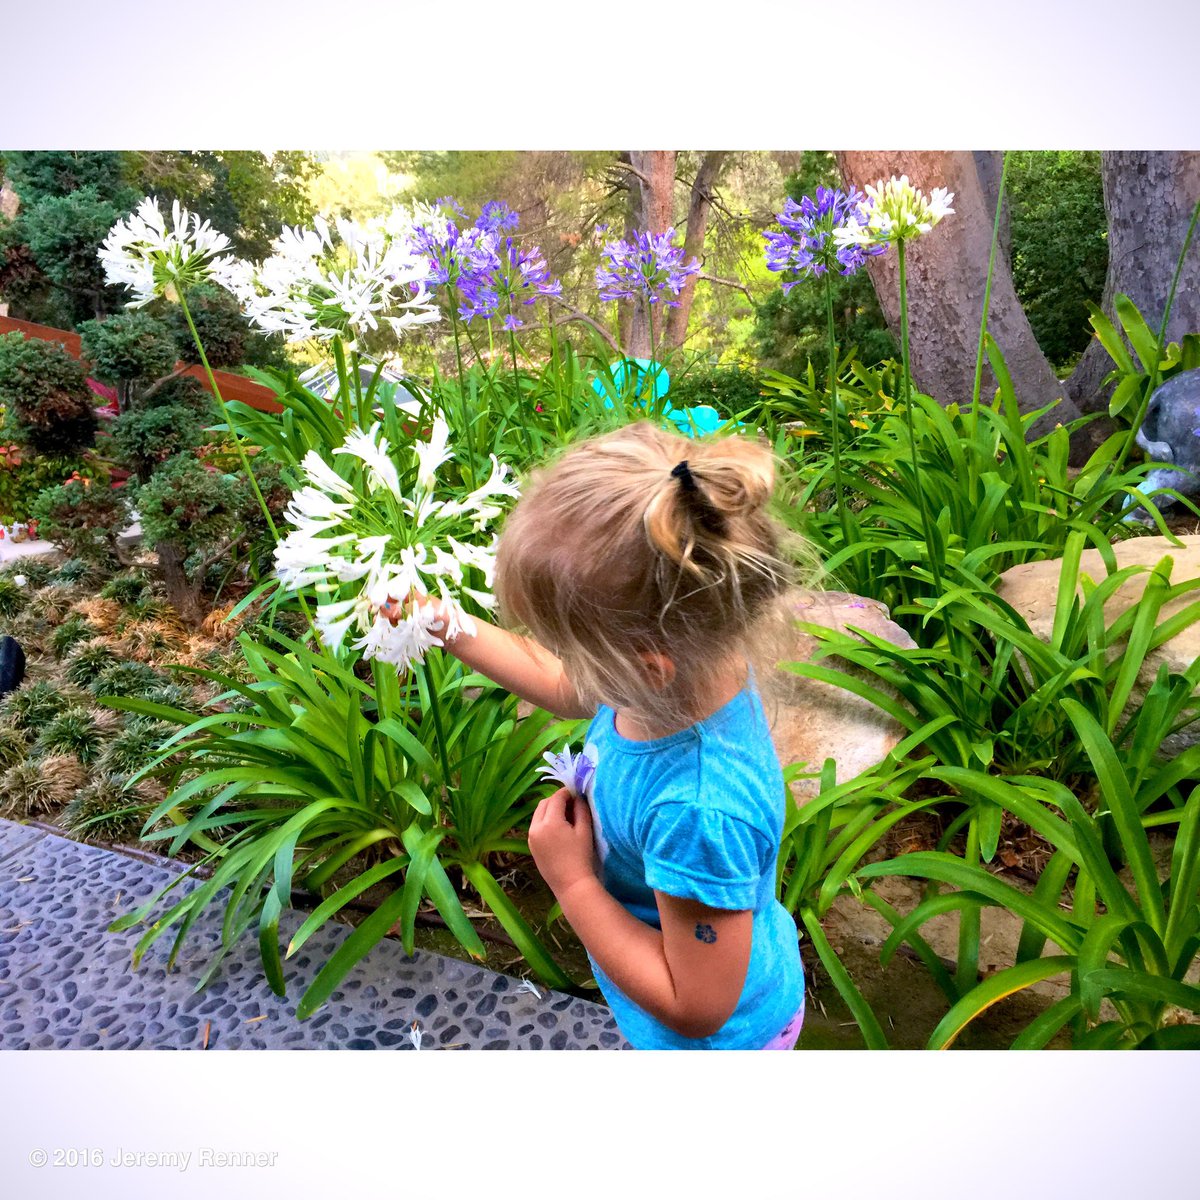 Discovering beauty in EVERY moment. #thankful #moretocome #flowergirl https://t.co/sxAXHg3Dp7